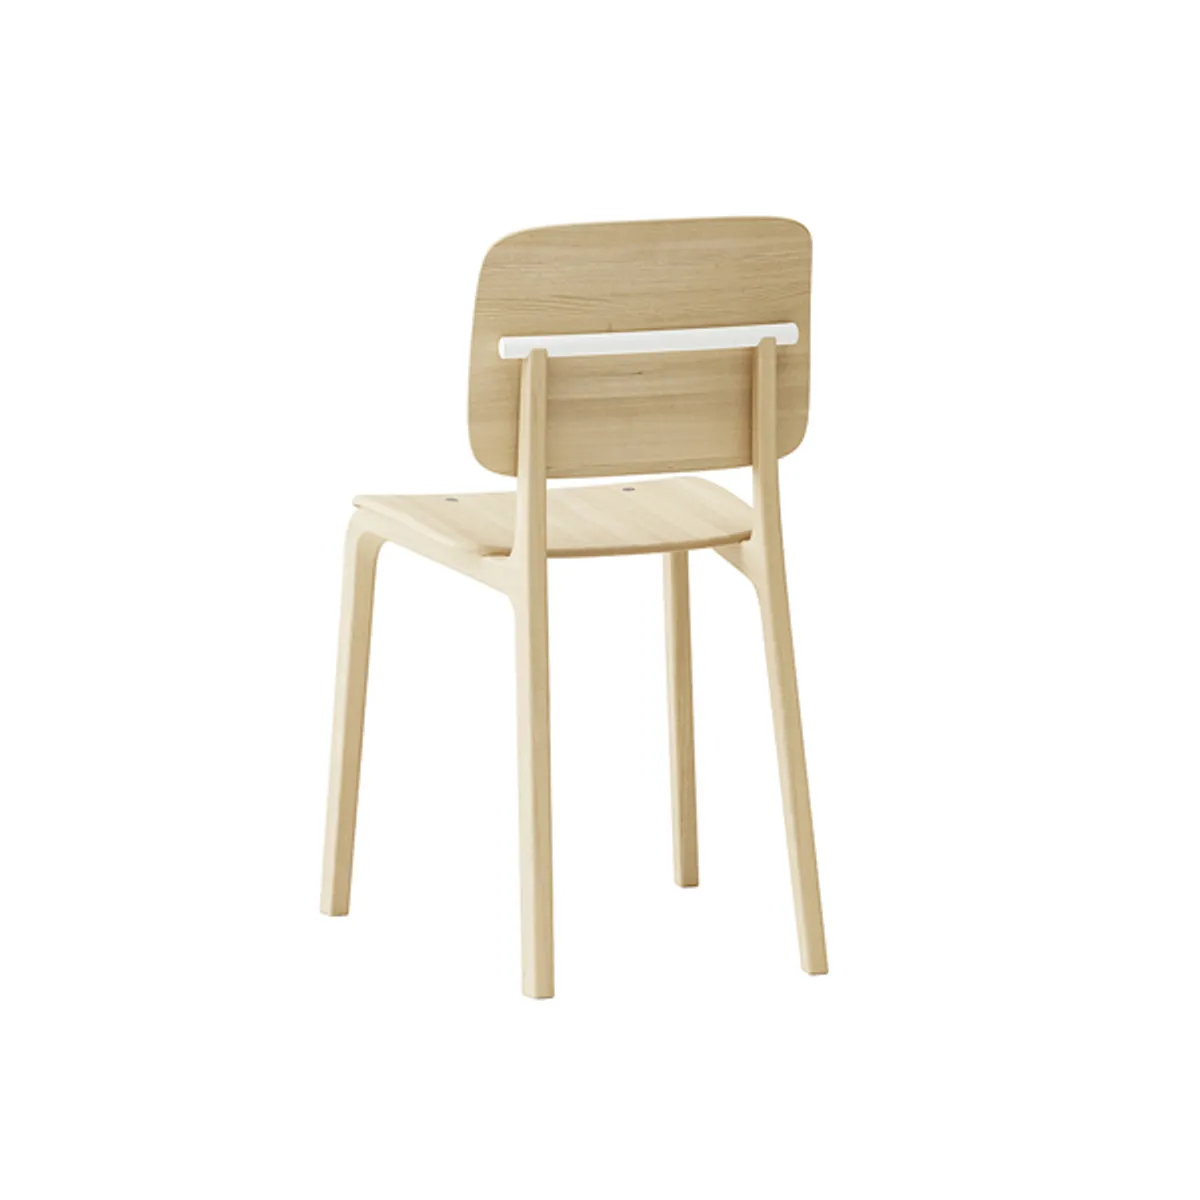 Product cameron side chair Inside Out Contracts